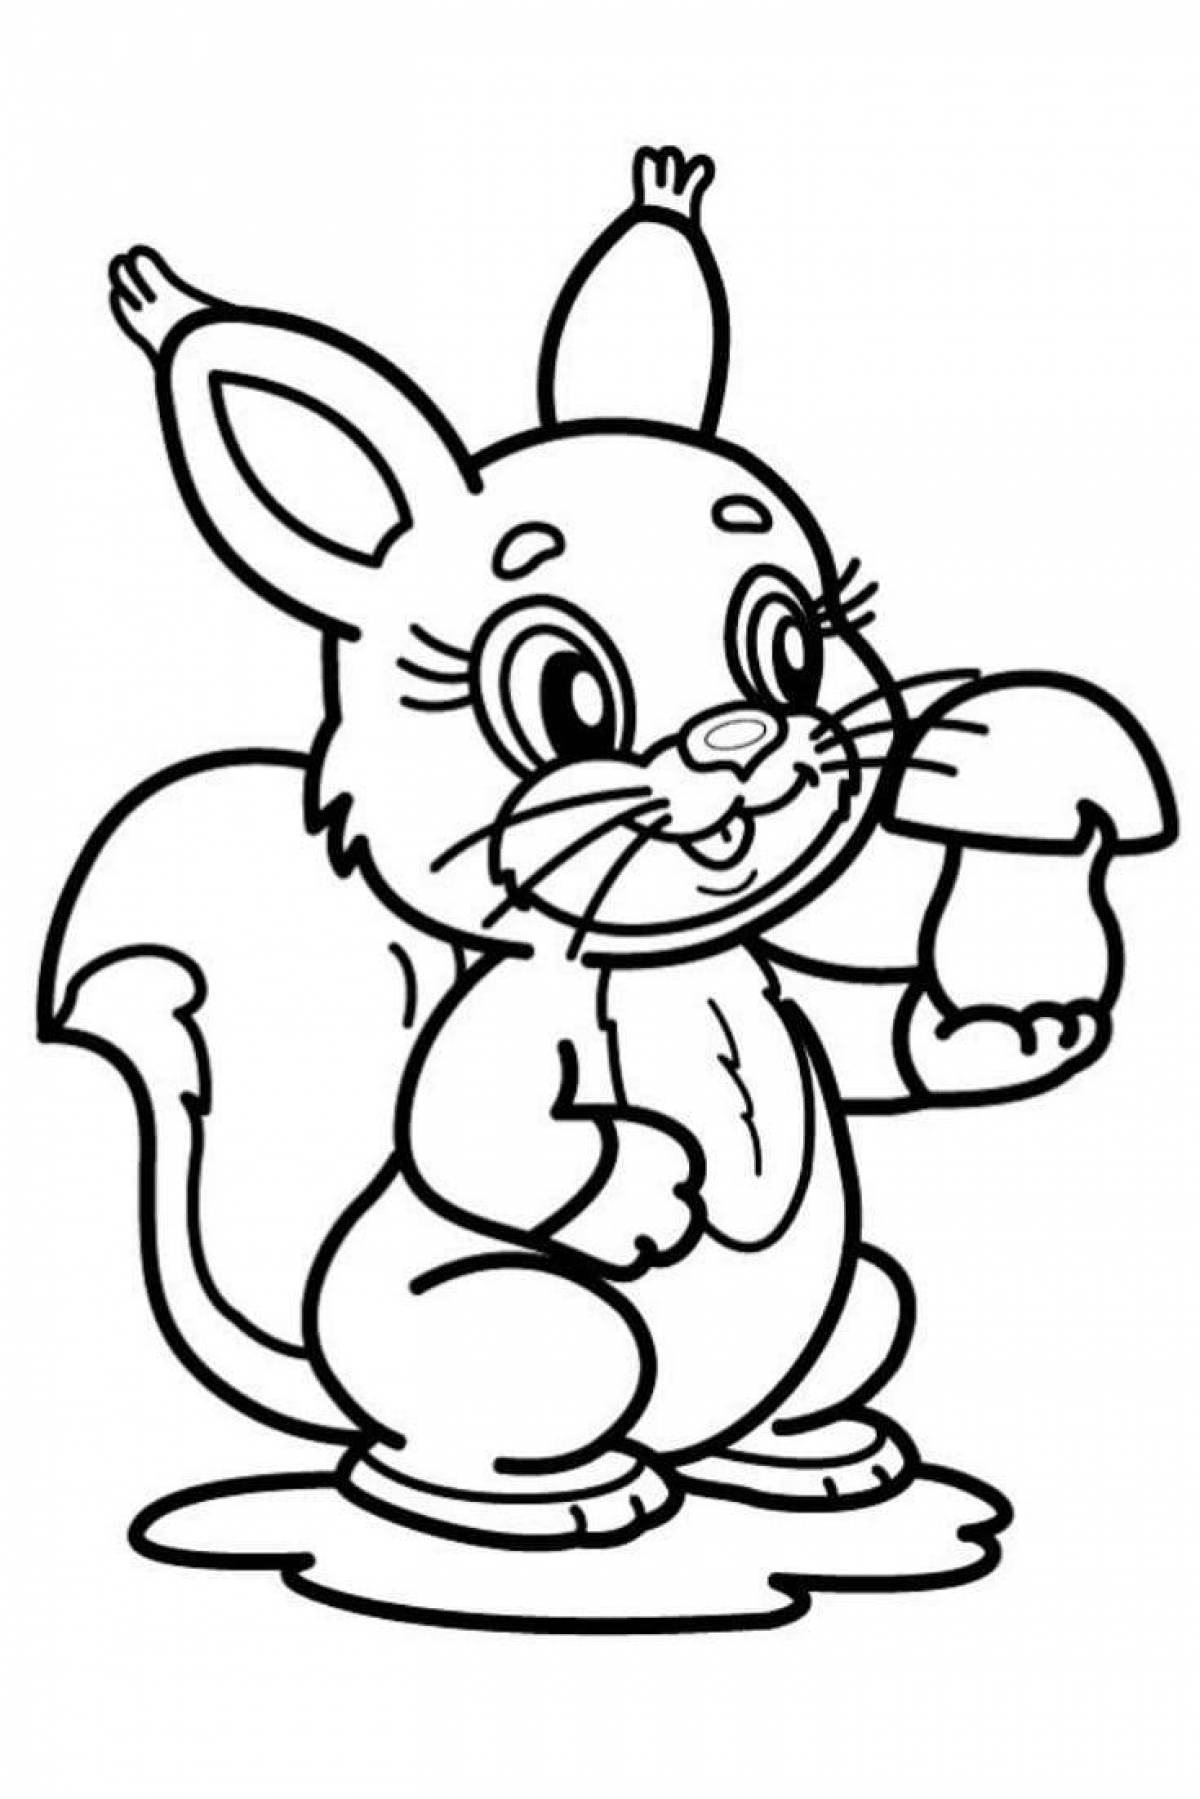 Mystical rabbit coloring book for children 3-4 years old